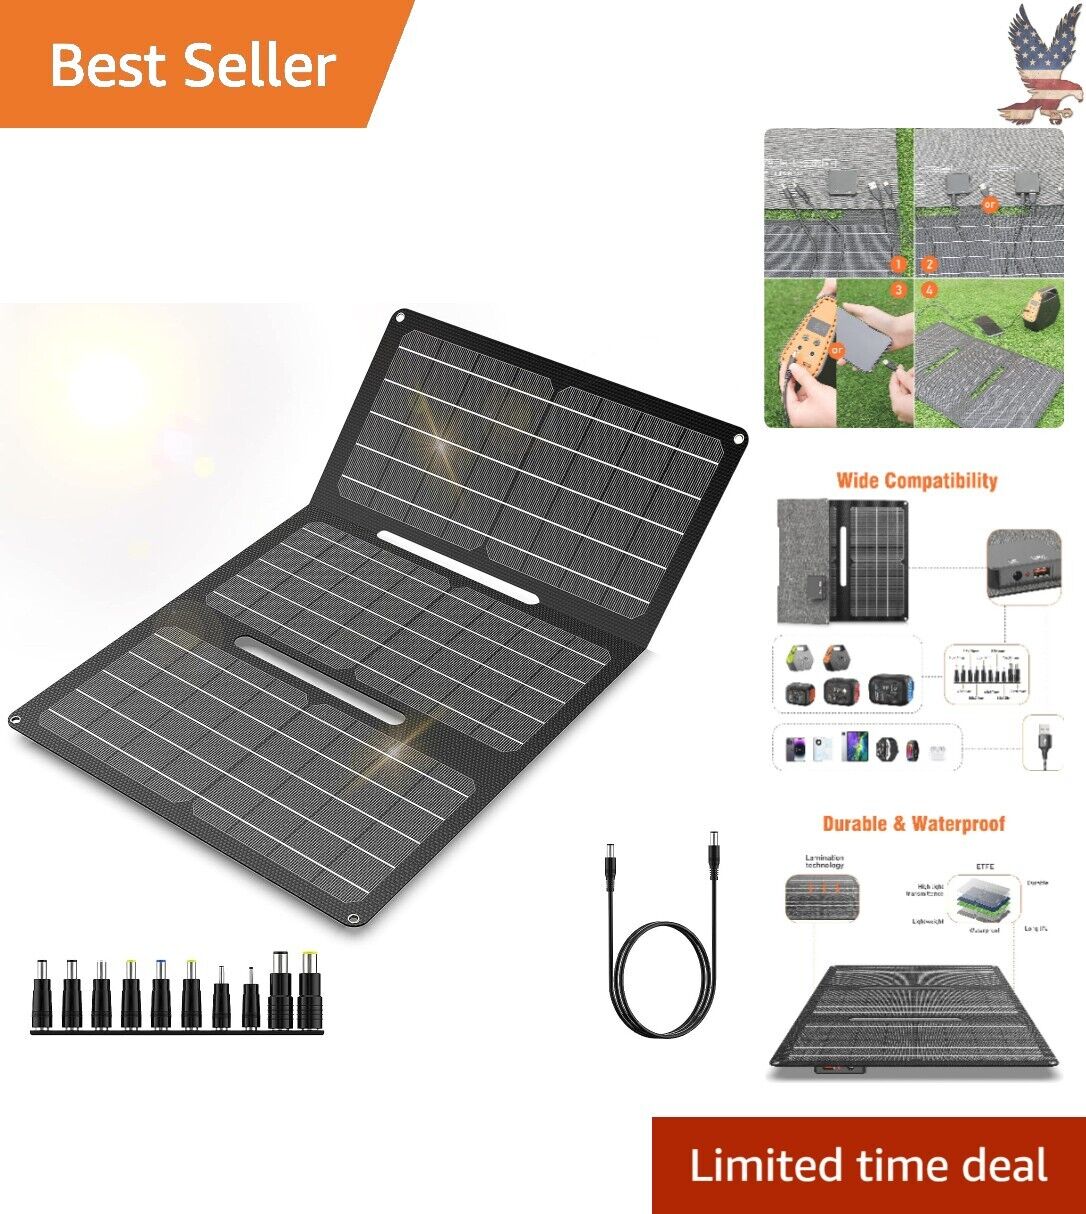 High Efficiency Waterproof 30W Solar Panel Charger - Portable - USB & DC Output